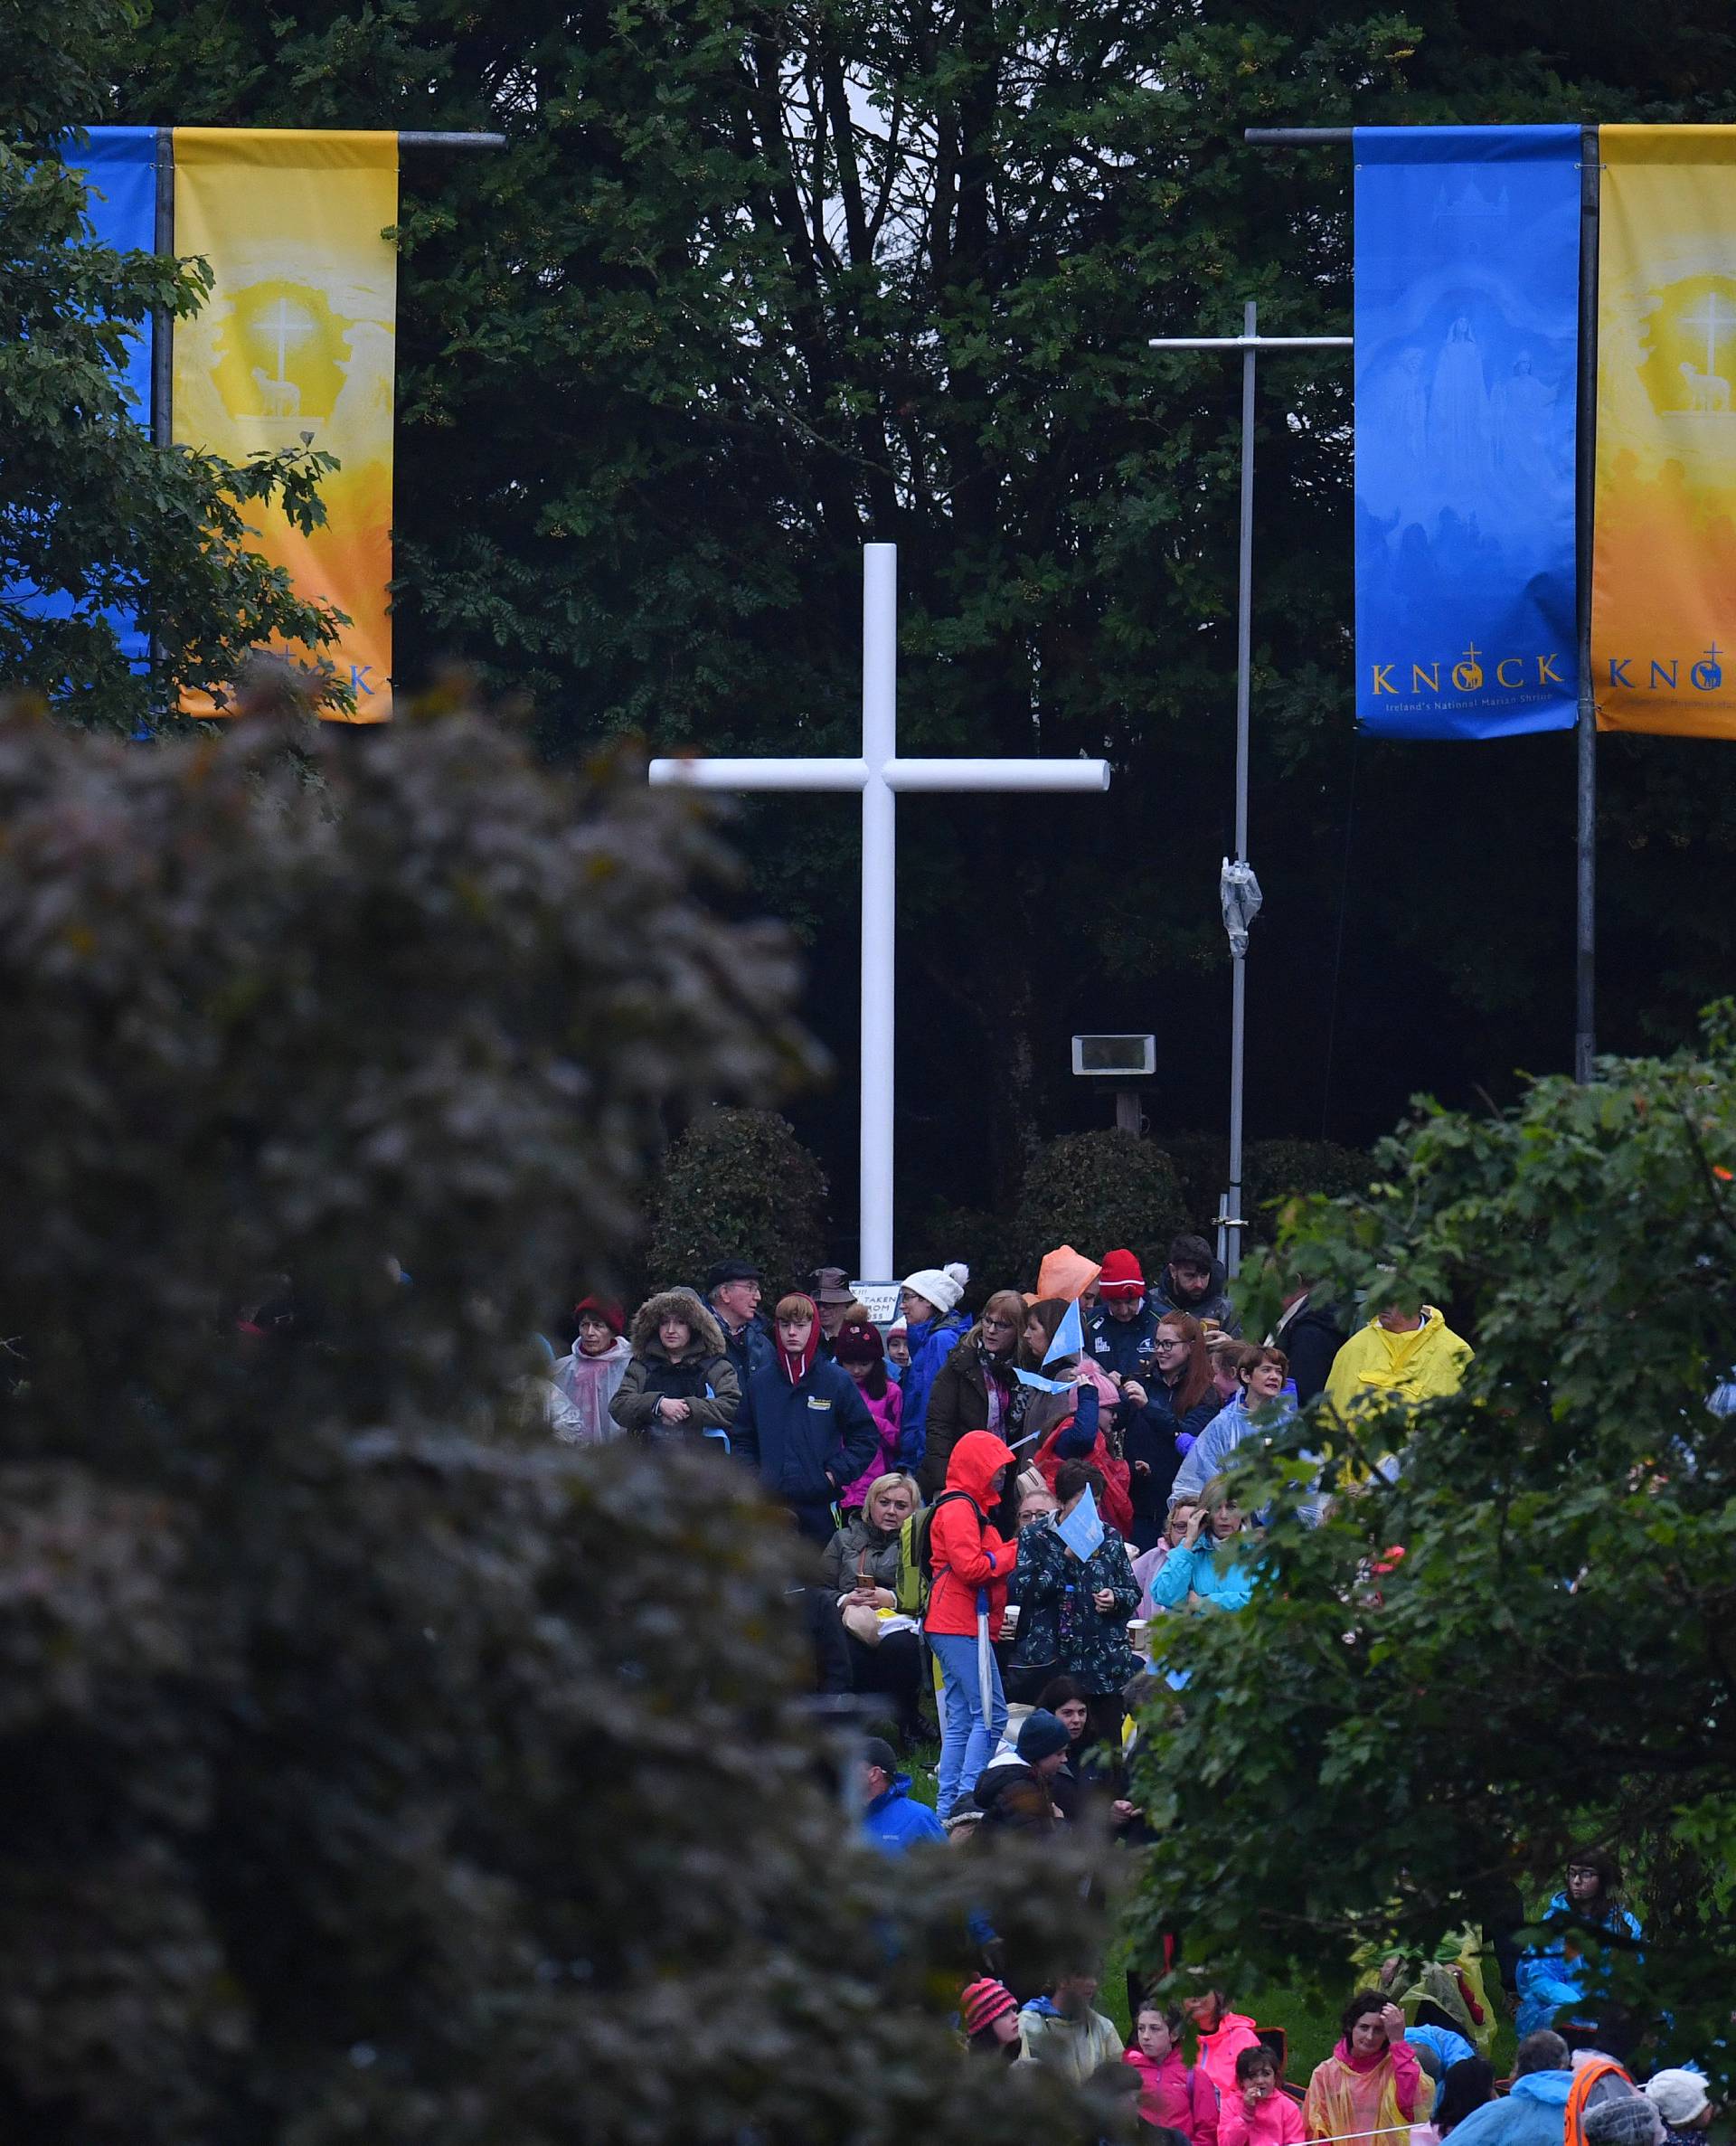 The faithful wait ahead of a visit of Pope Francis to Knock Shrine in Knock